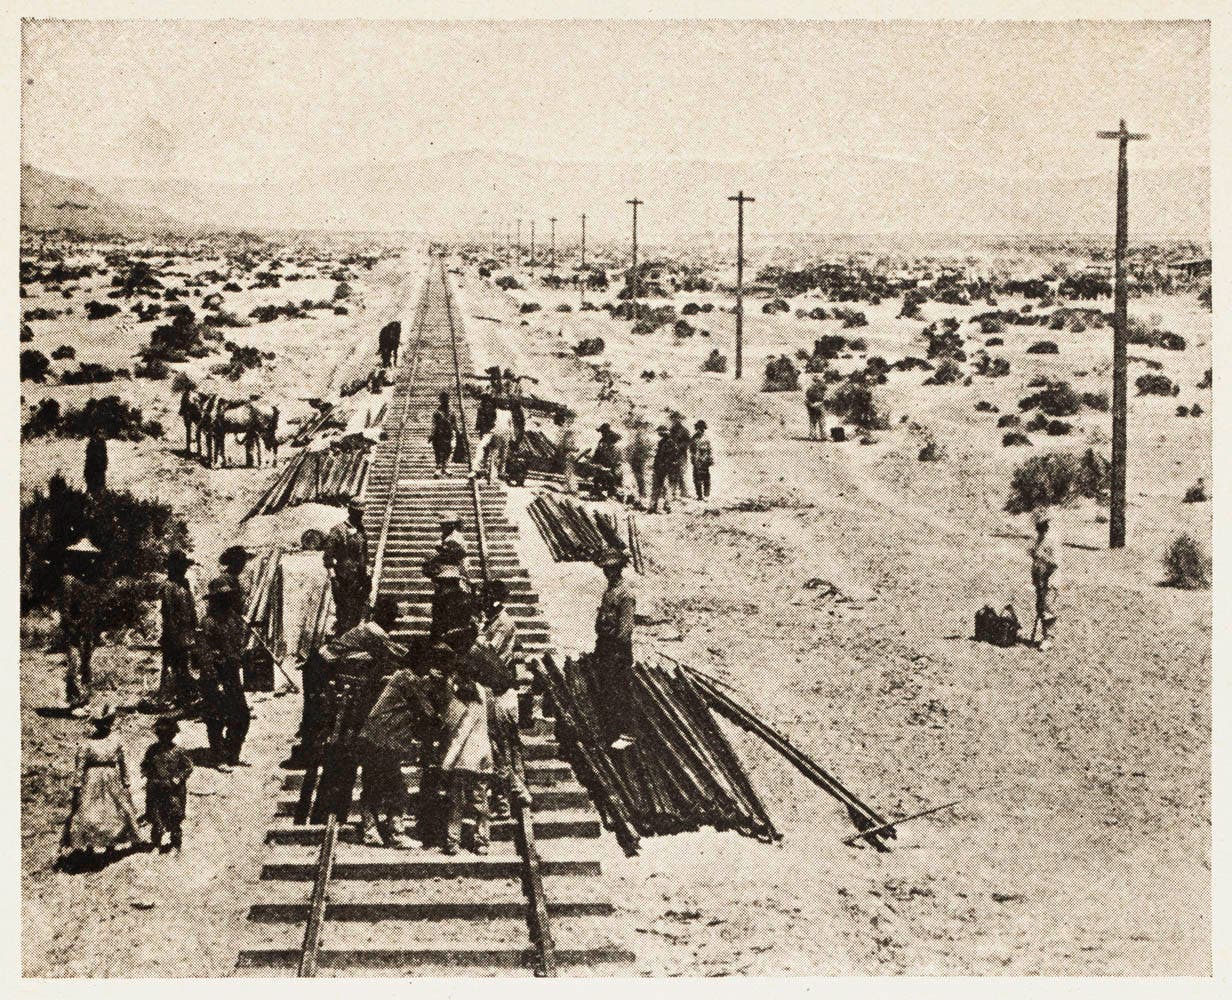 Alfred A. Hart photograph of Chinese Central Pacific construction crews along the Humboldt Plains in Nevada. Hart served as official photographer of the Central Pacific Railroad from 1864 to 1869, documenting construction from Sacramento, California, to Promontory Summit, Utah.